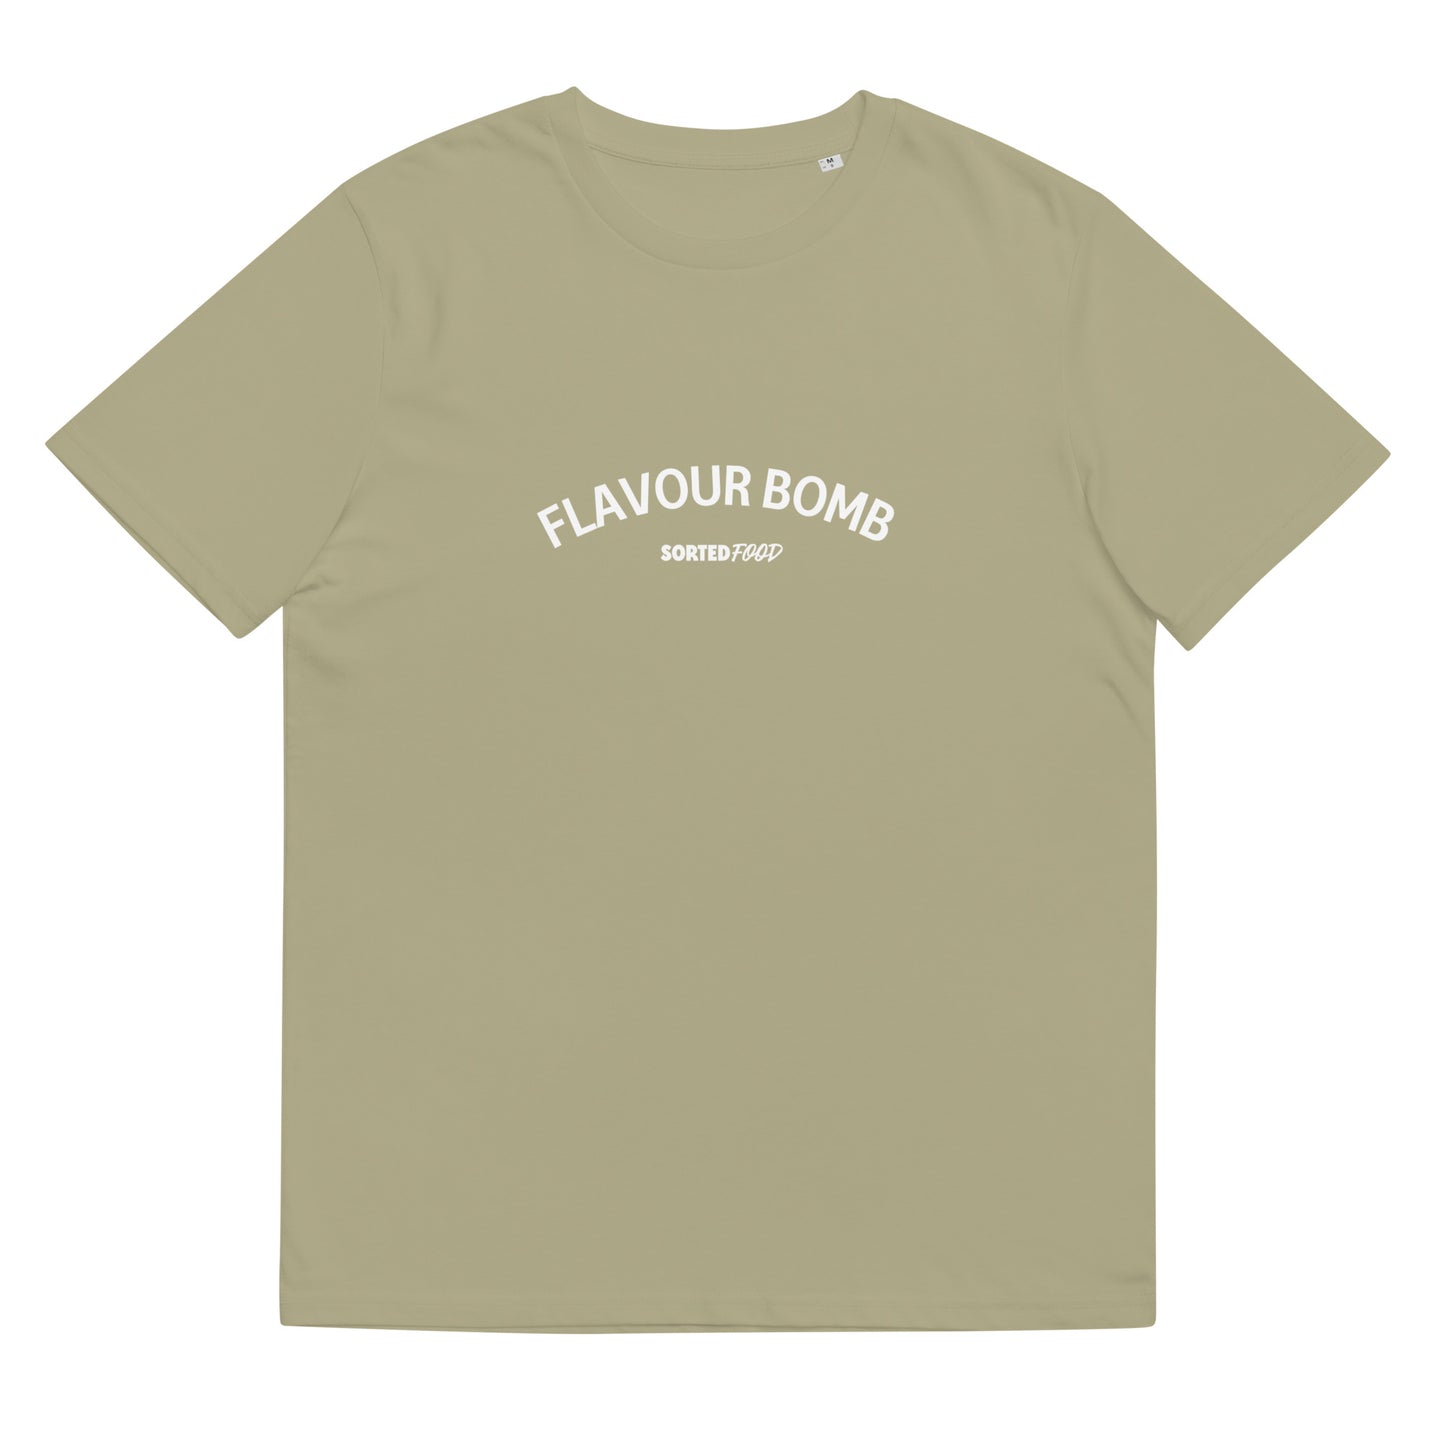 Flavour Bomb Tee – Sorted Food